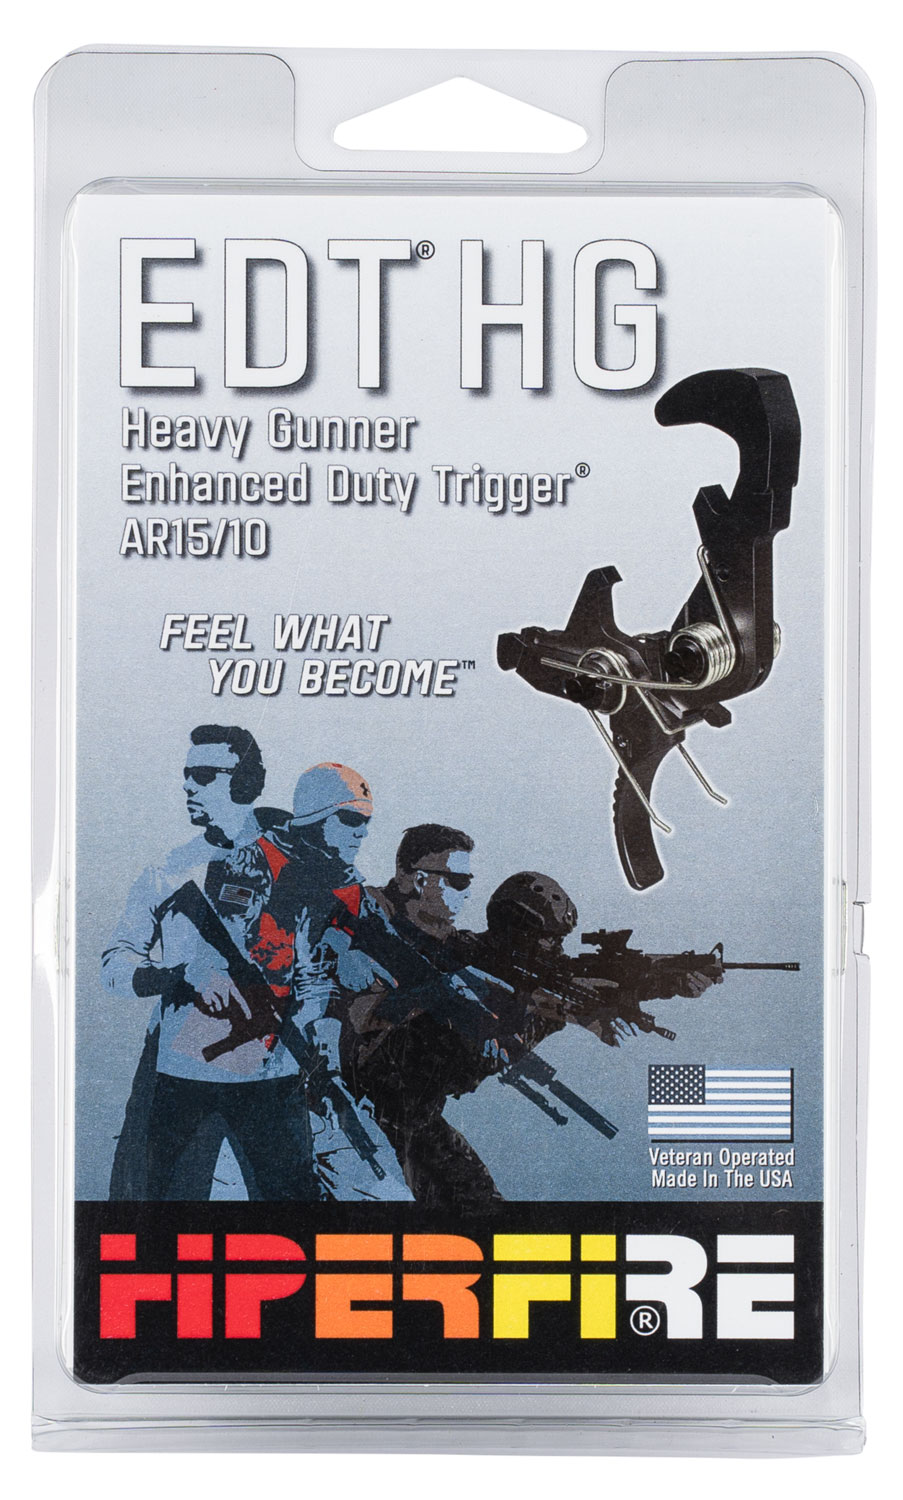 Hiperfire EDTHG Enhanced Duty Heavy Gunner Single-Stage Curved Trigger with 4.50-5.50 lbs Draw Weight for AR-Platform